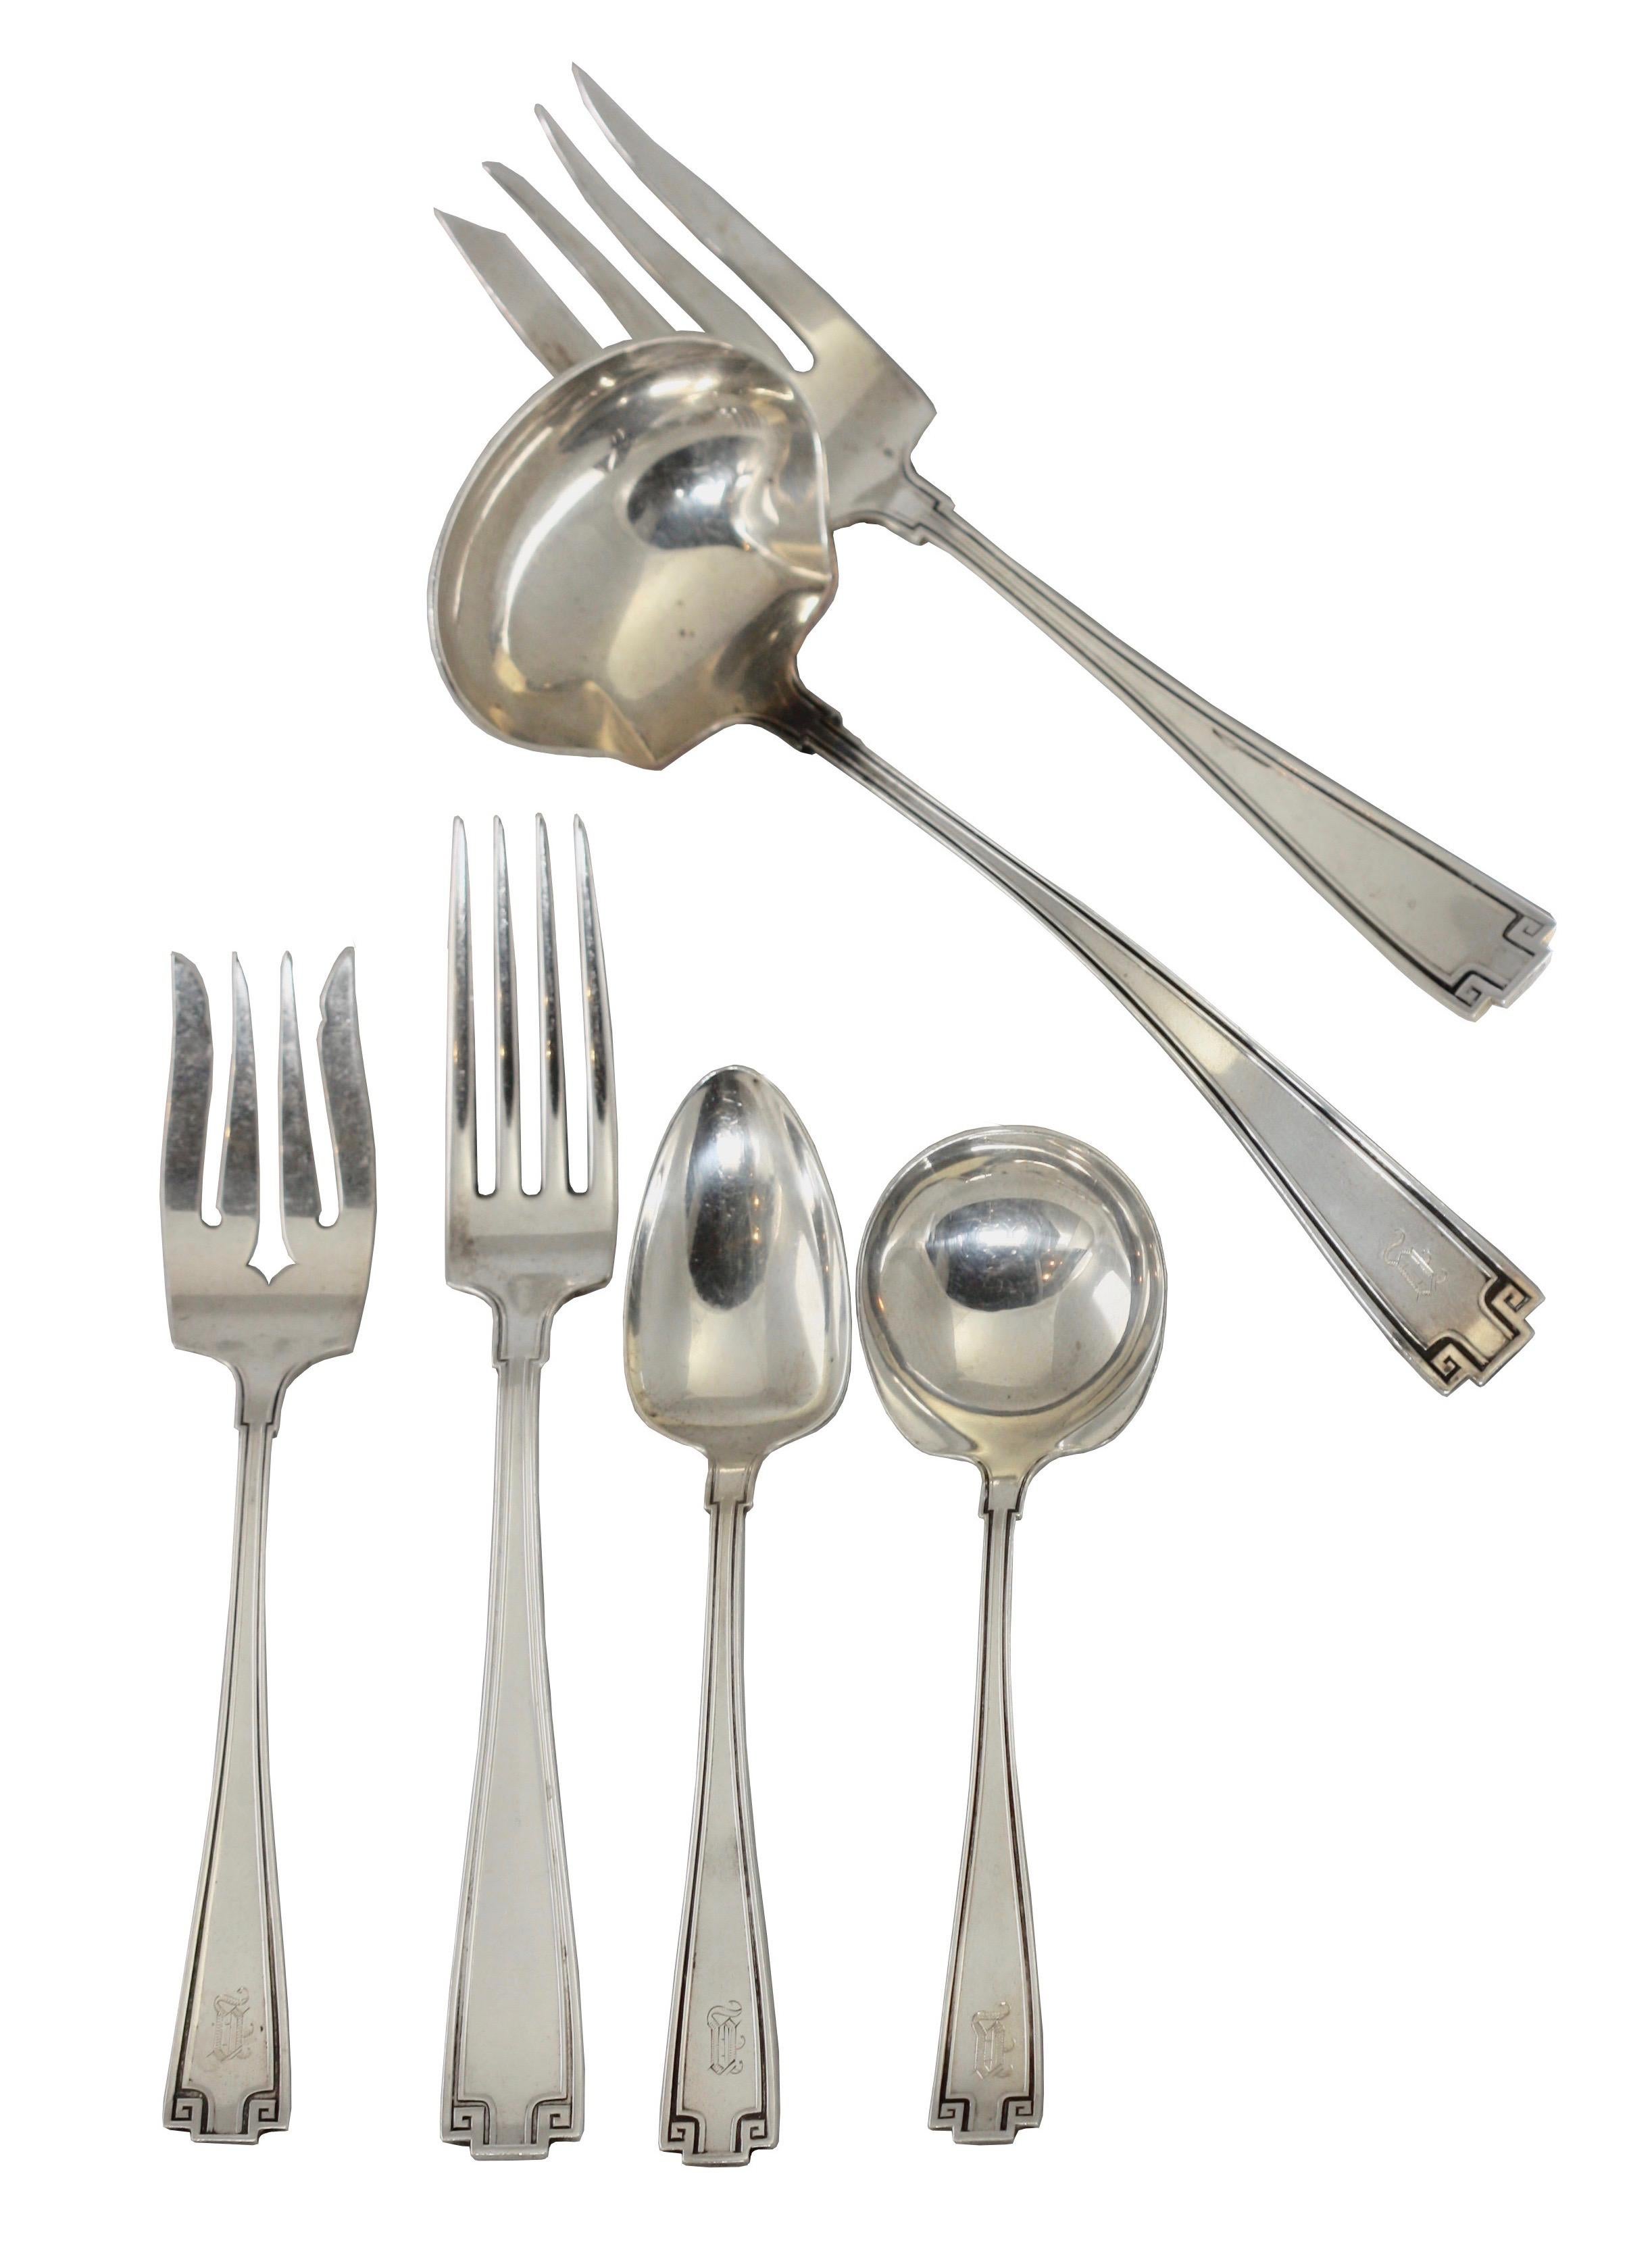 Set of sterling silverware by Gorham, Etruscan style, 1913.
Consisting of:
6 dinner forks (7 in.)
7 teaspoons (5 5/8 in.)
8 pie forks (6 1/4 in.)
12 round soup spoons (5 1/4 in.)
1 meat fork (7 in.)
1 gravy ladle (7 1/8 in.)
Total weight